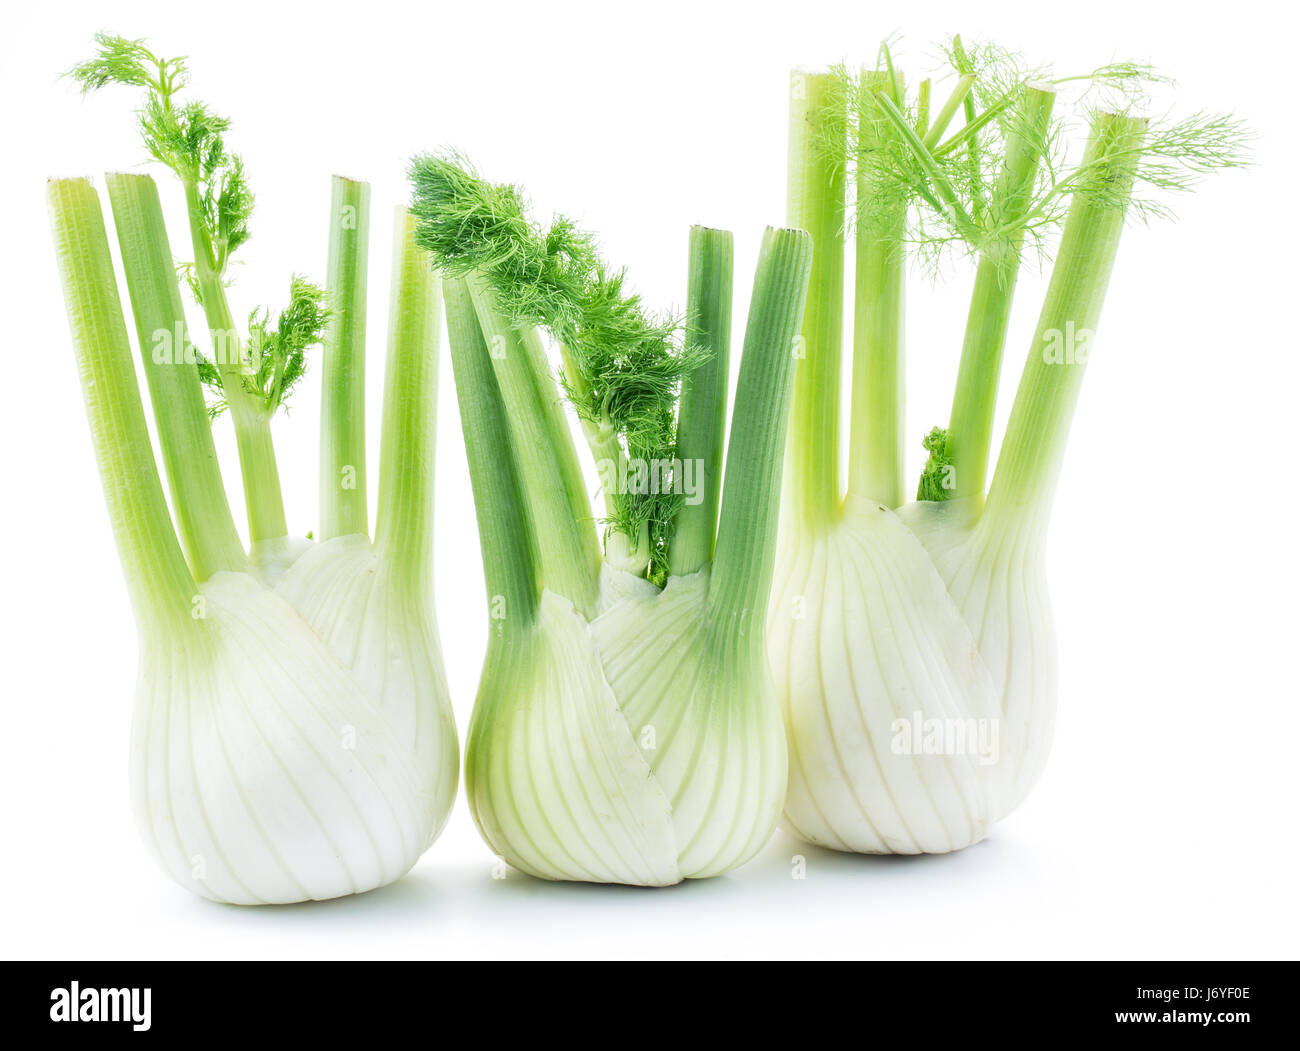 Florence fennel bulbs. Isolated on a white background. Stock Photo